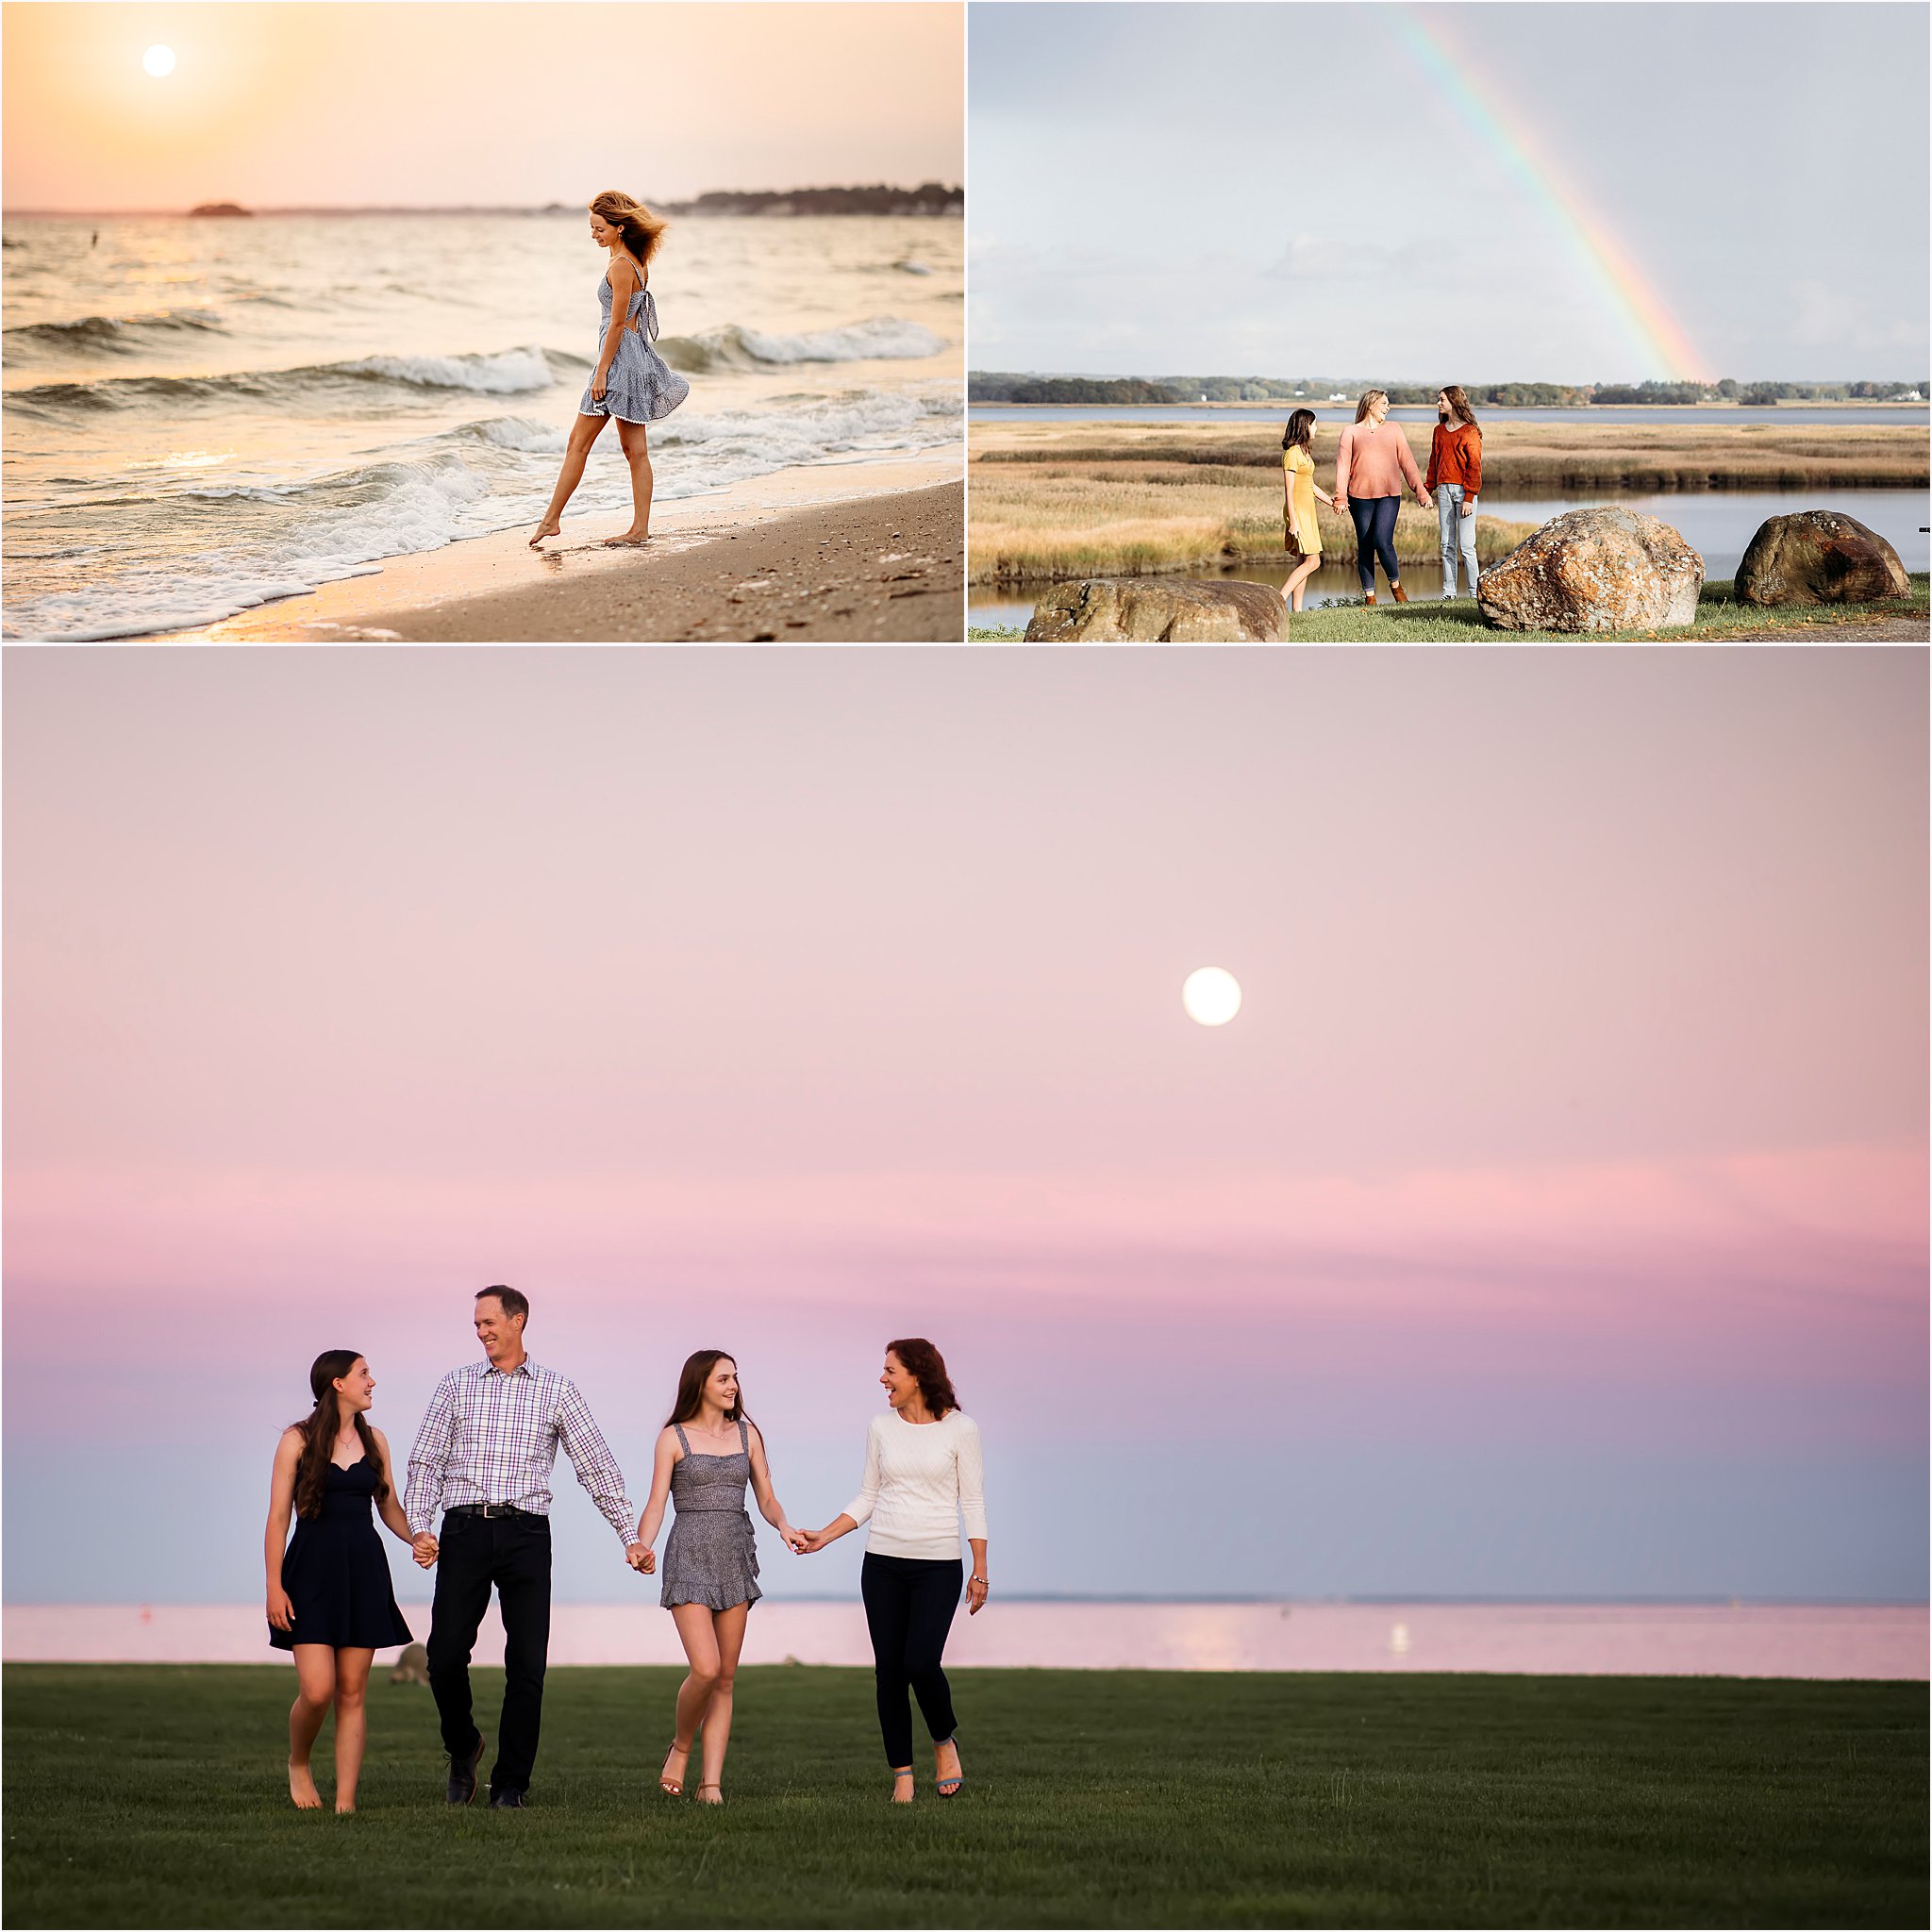 Most amazing skies for CT family photographer's 2021 Session Superlatives
